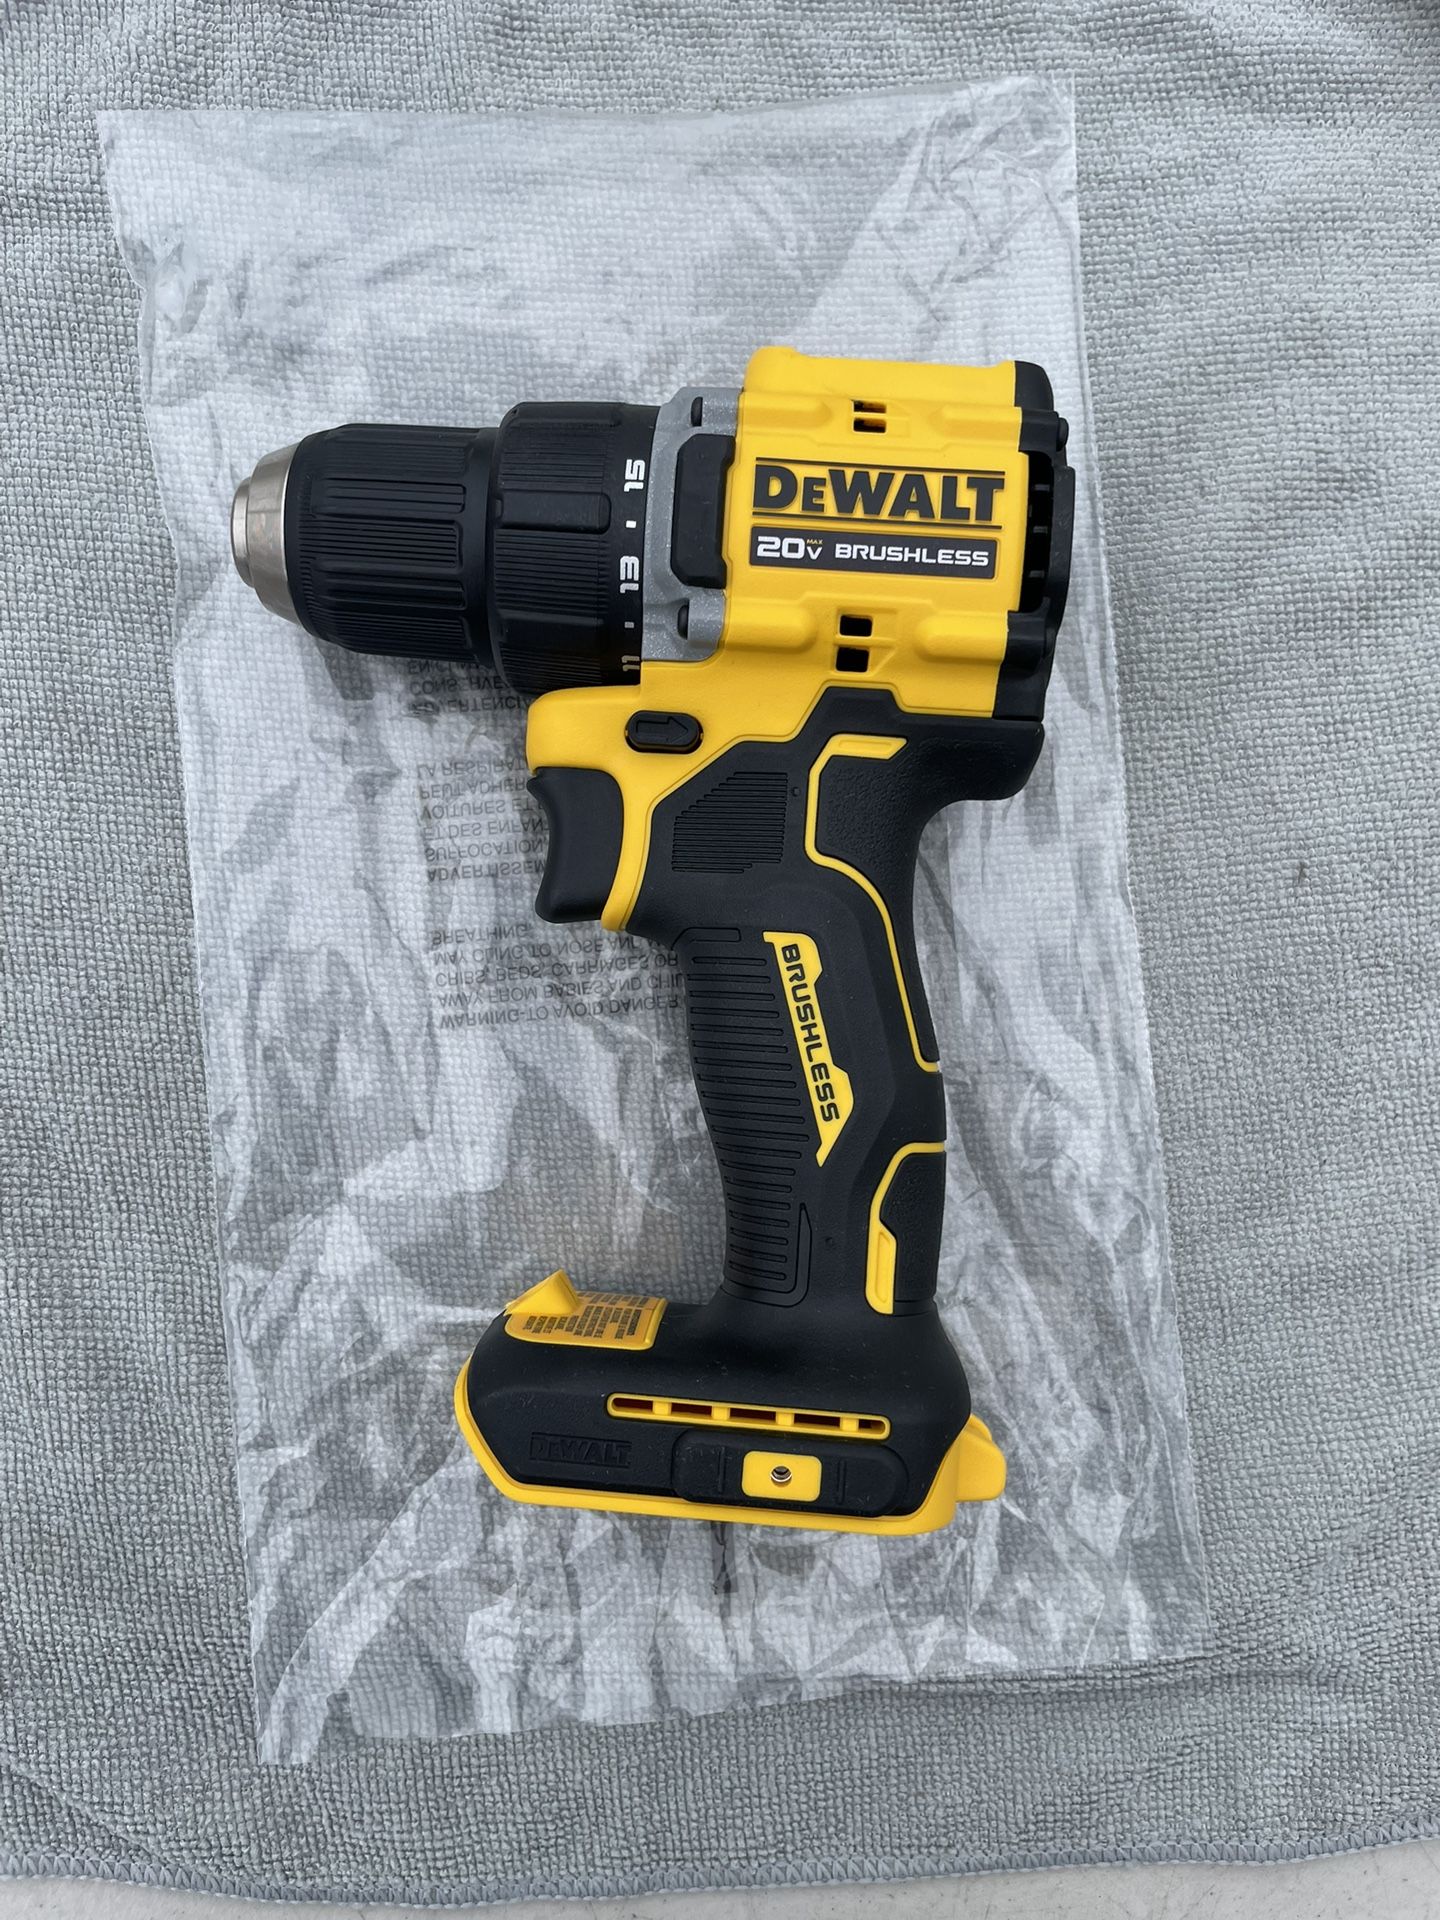 Atomic Compact Drill Driver ( Tool Only)